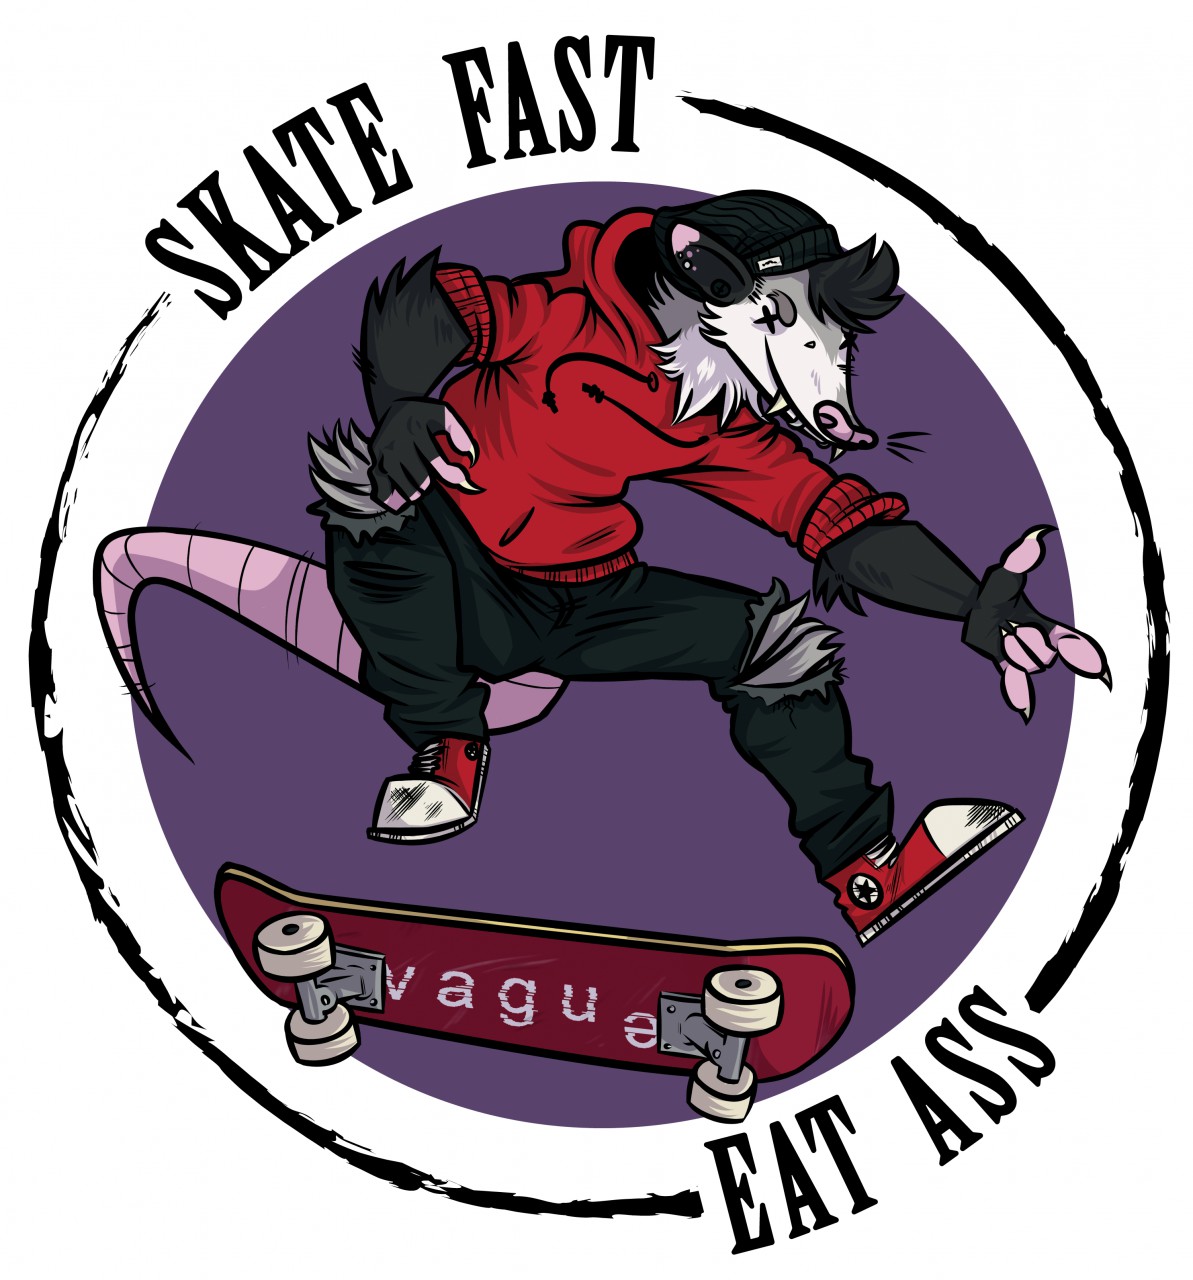 And skate eat ass fast Skate Fast